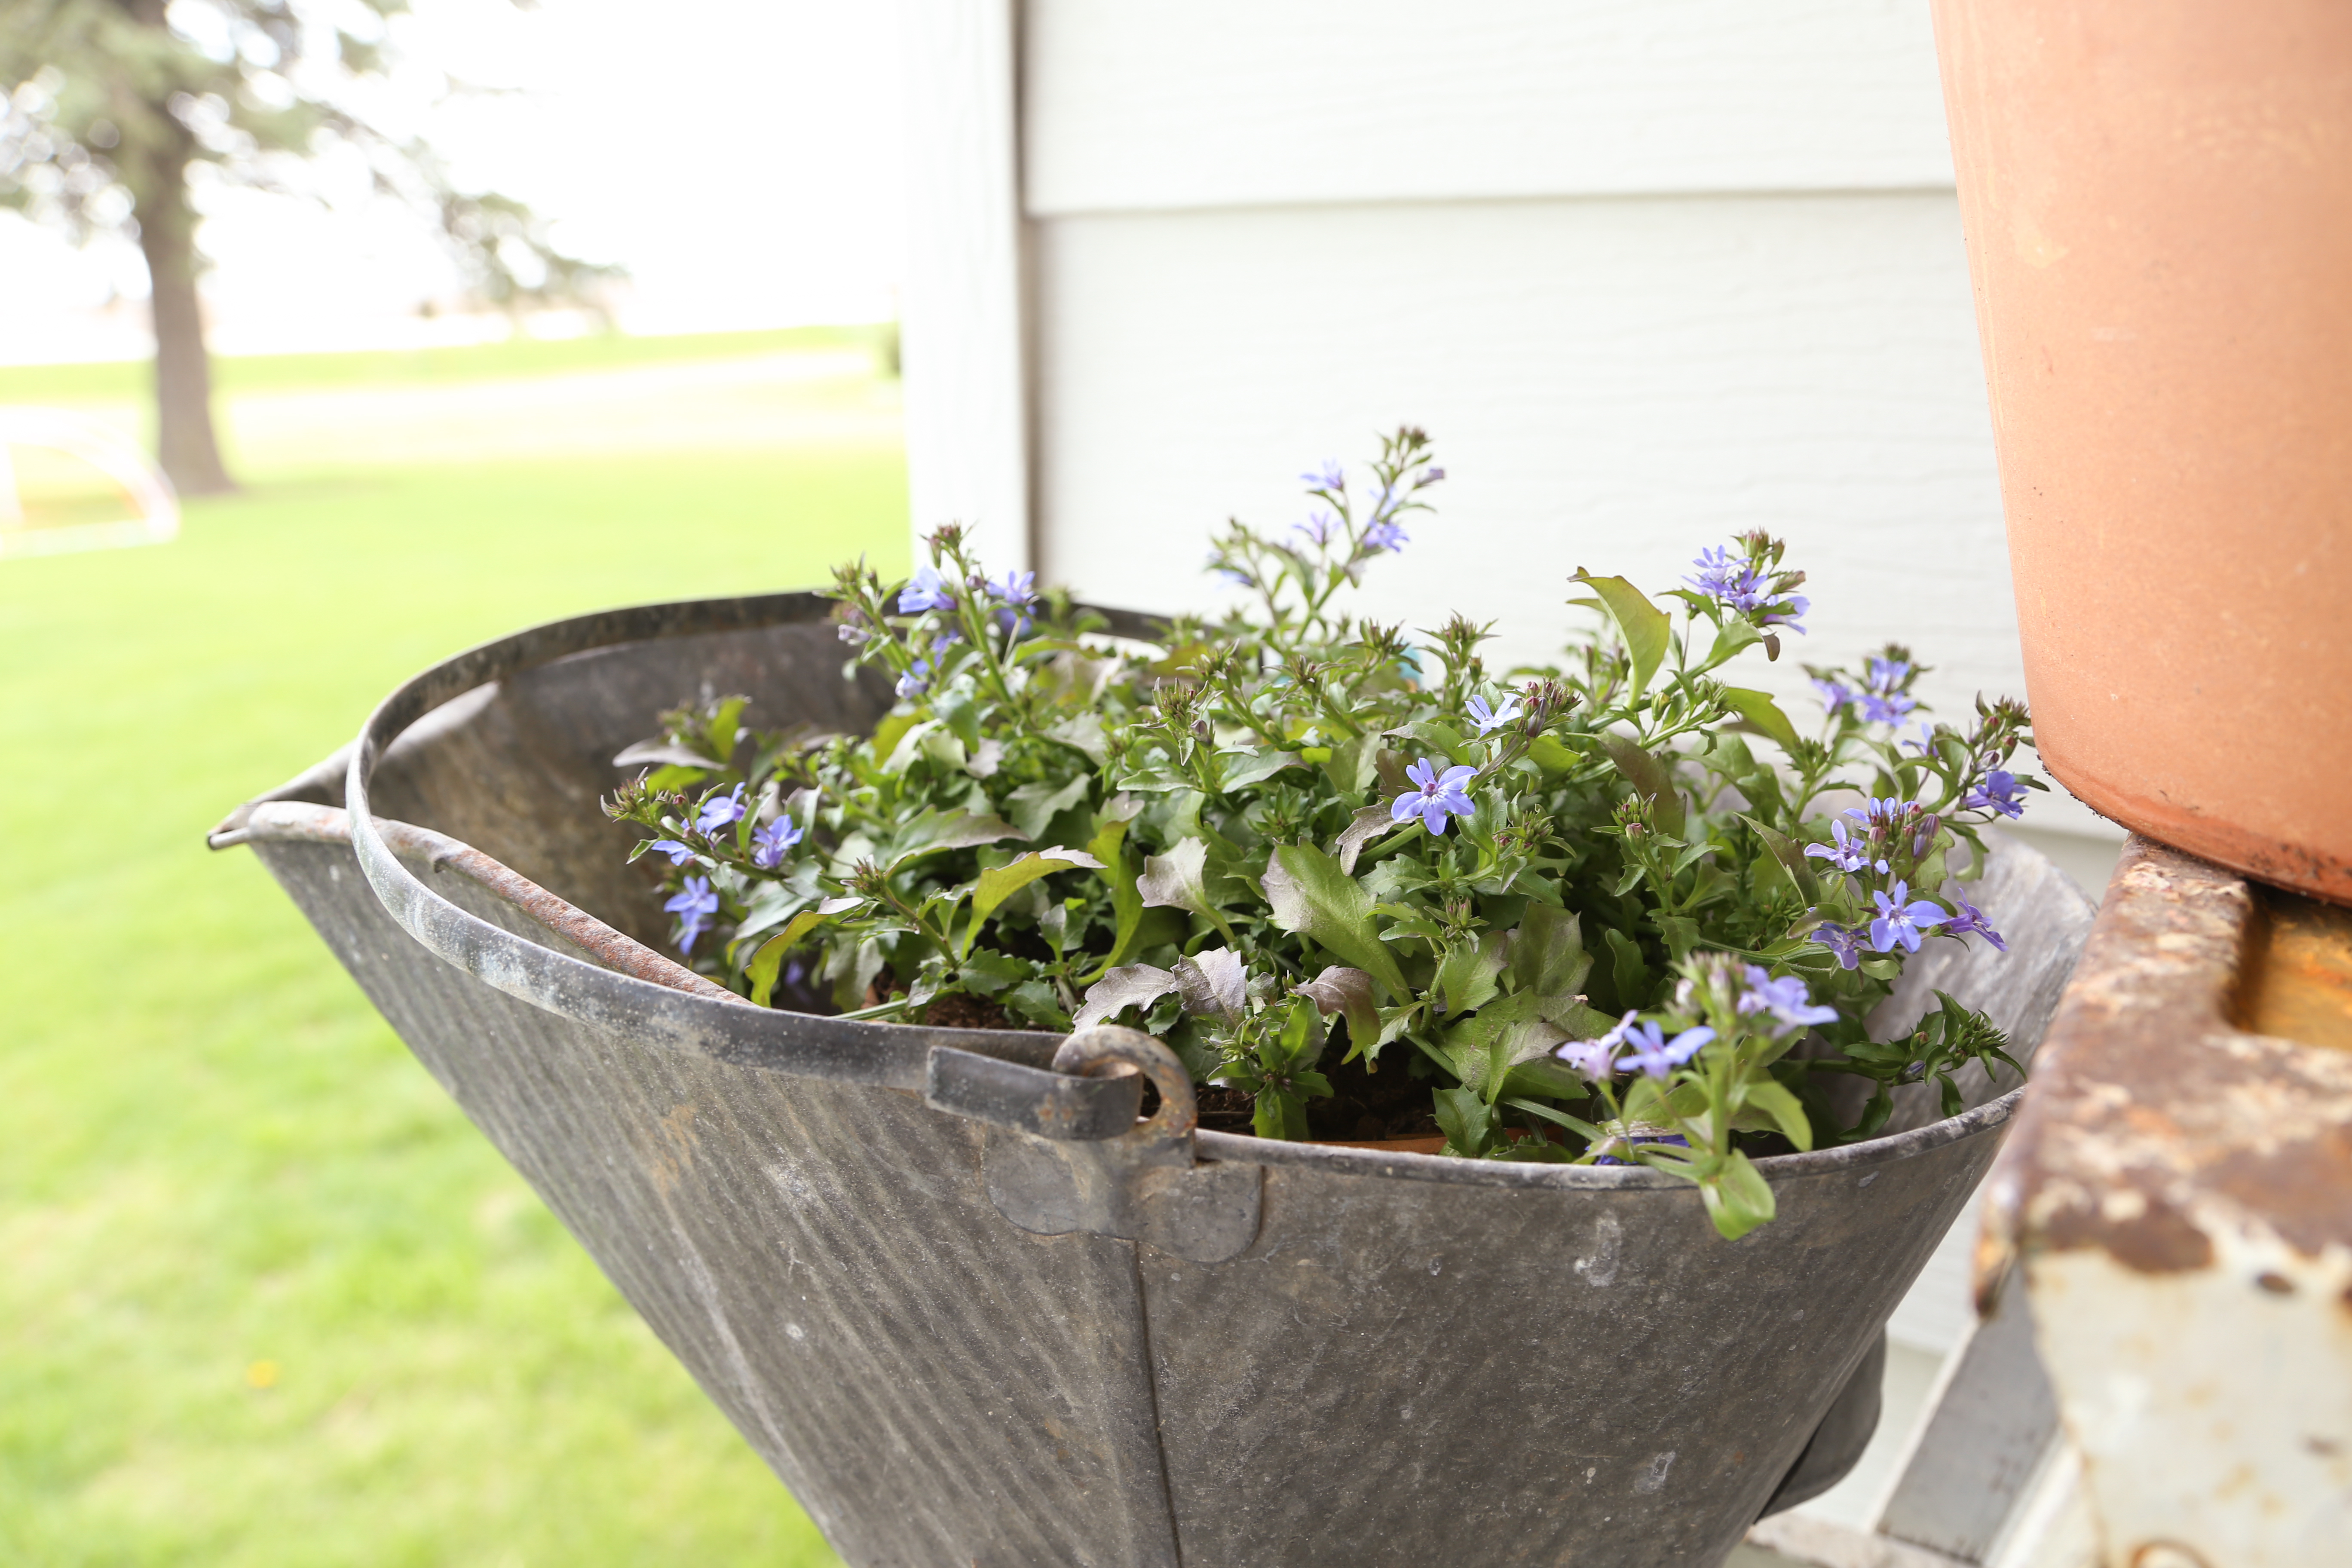 Colorful plants in a galvanized container give the porch a farmhouse feel.